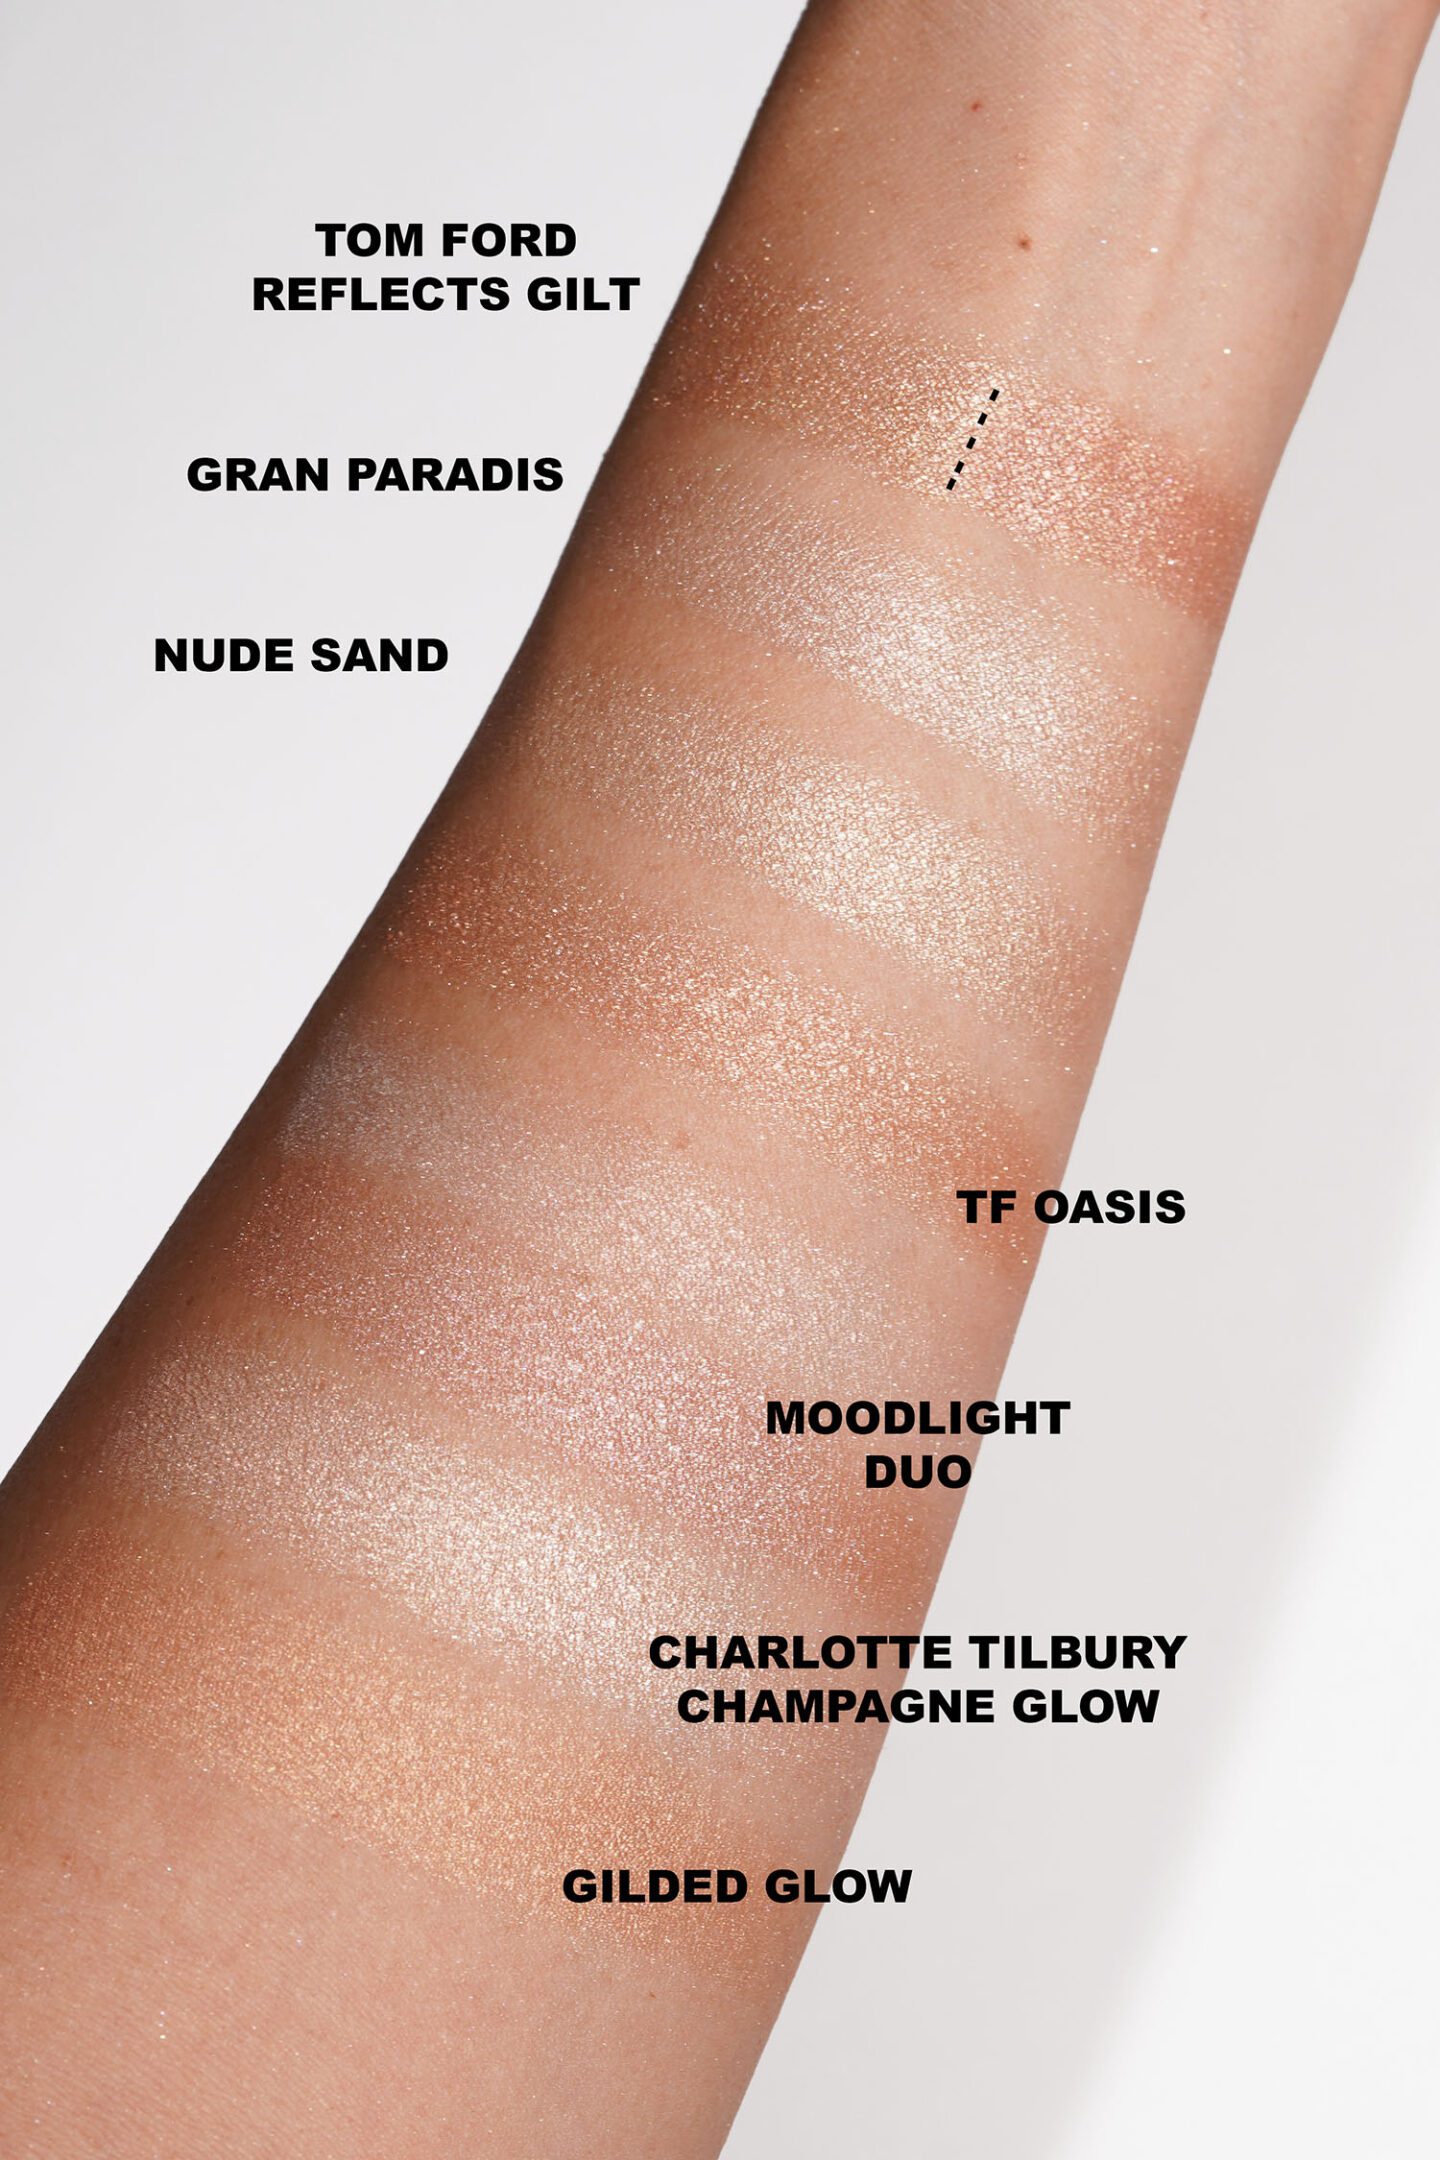 Tom Ford highlighter swatches comparisons